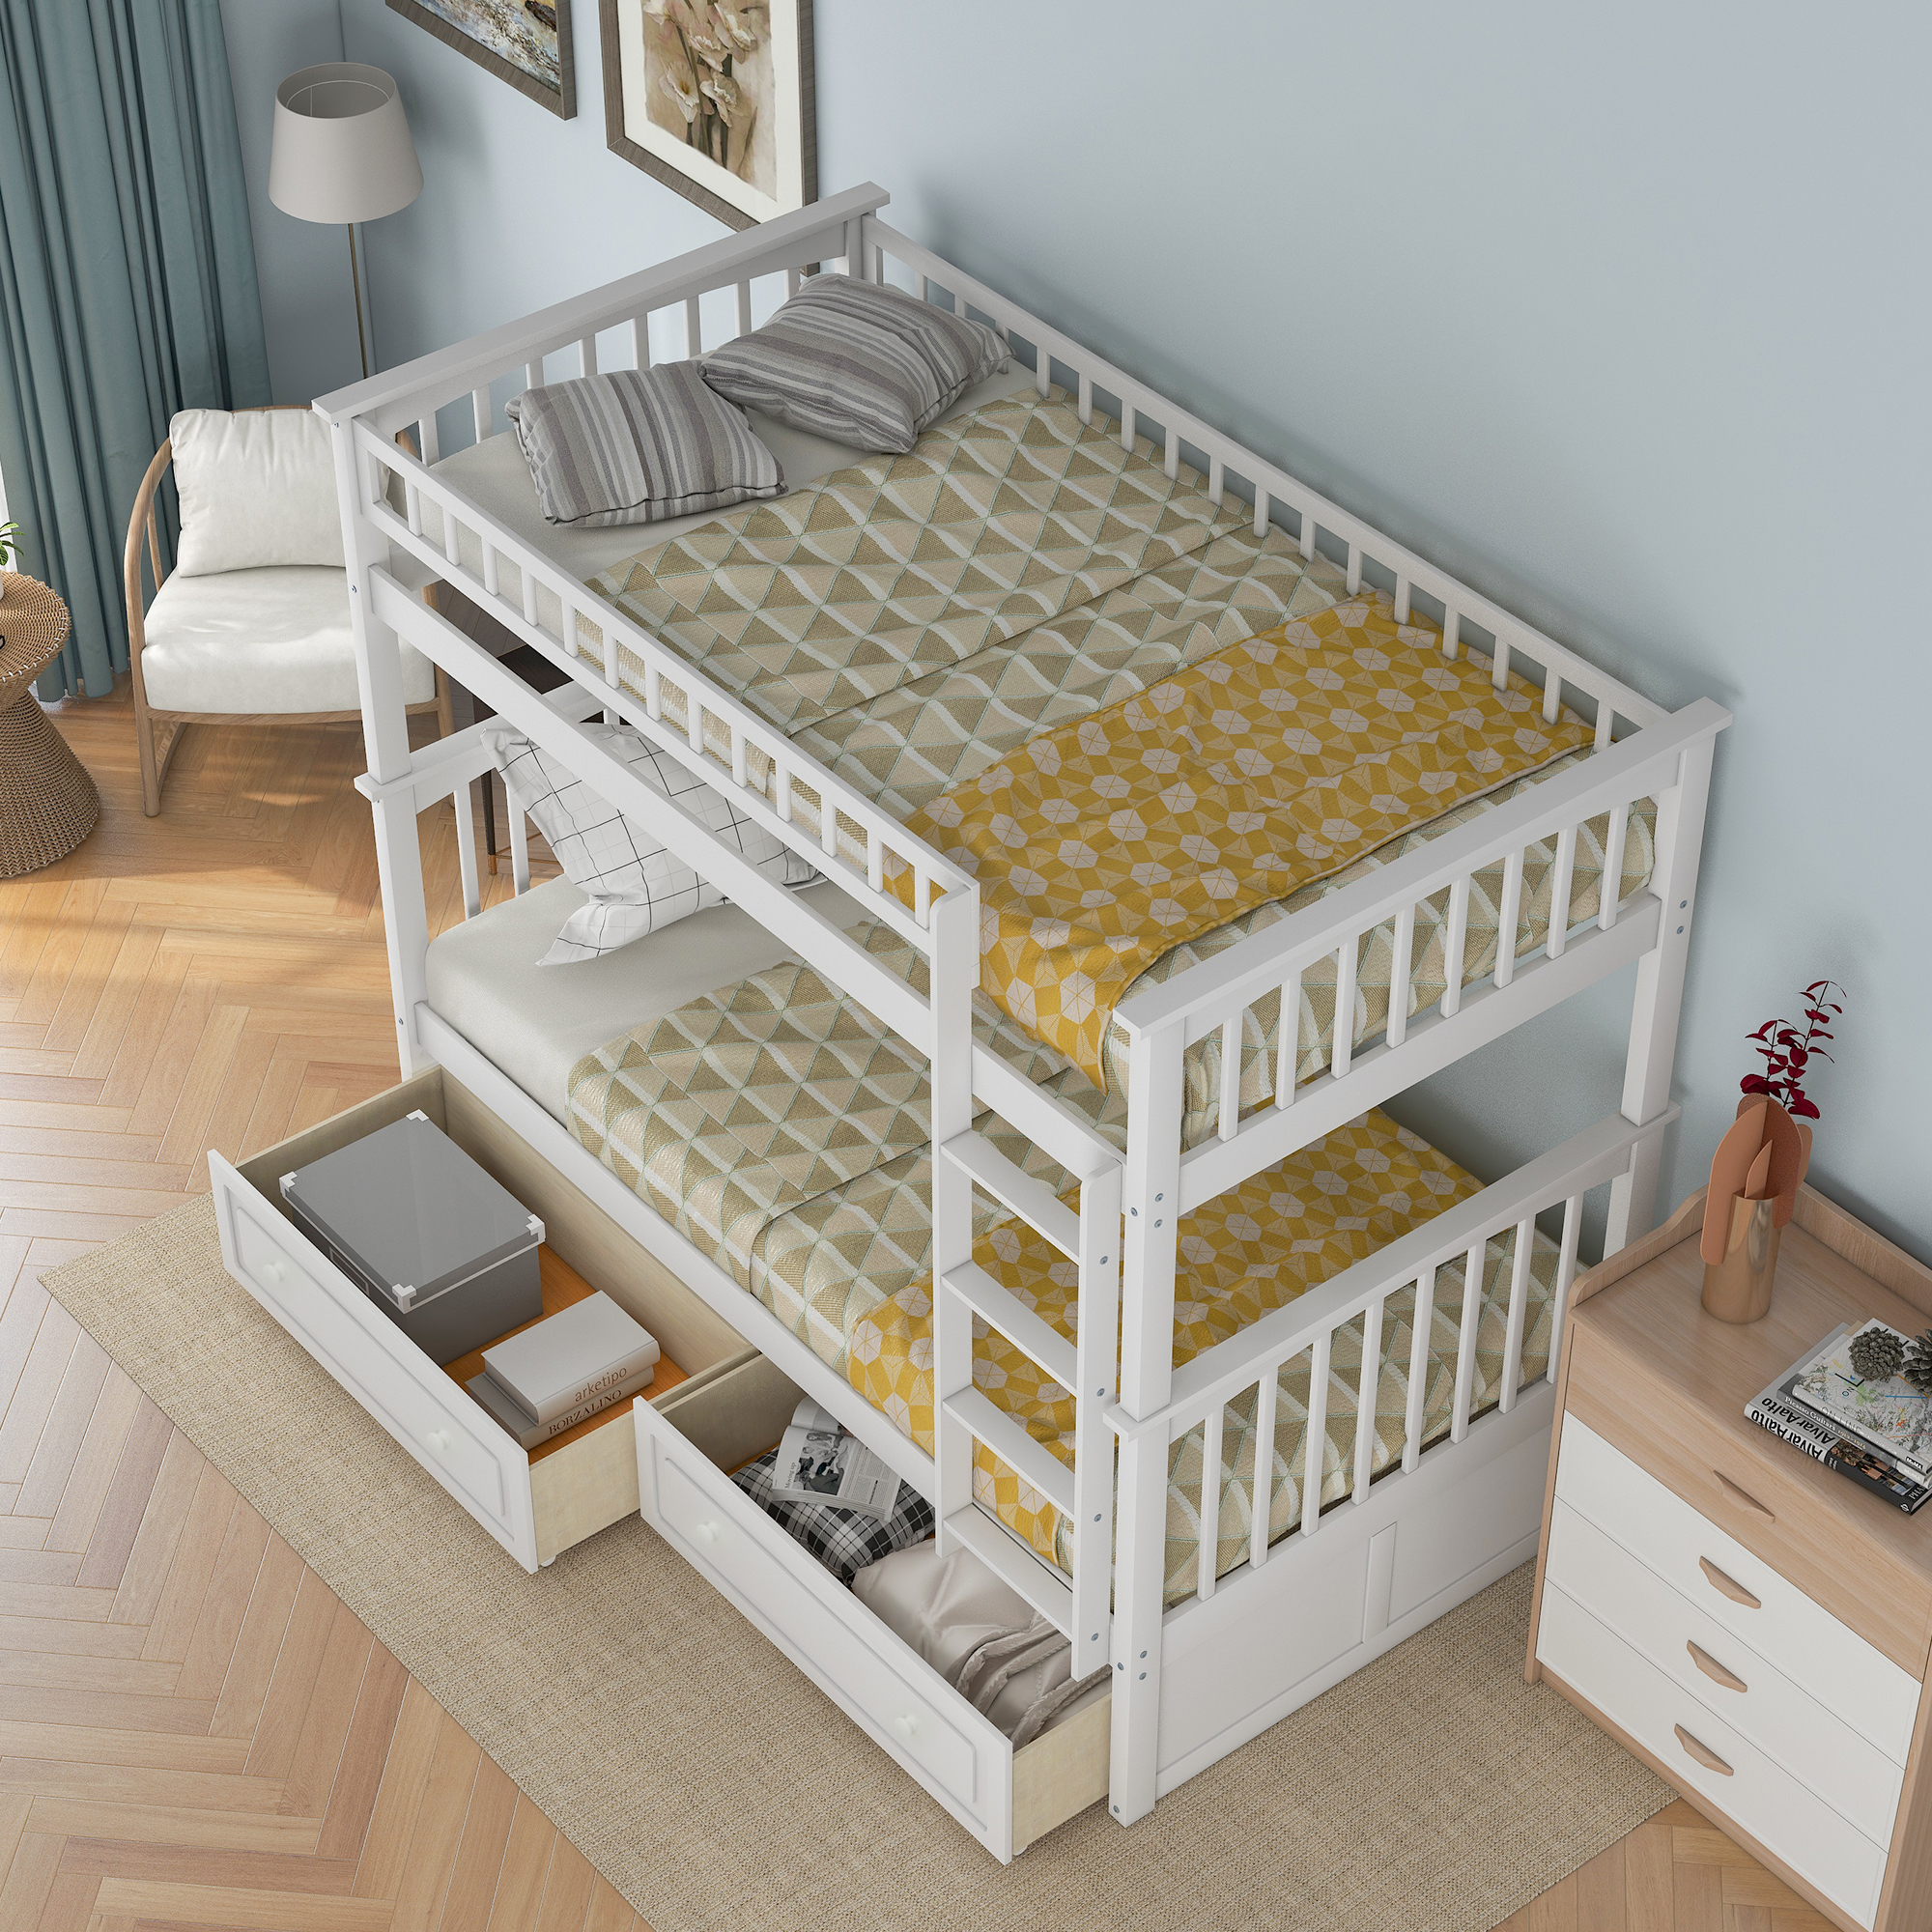 Euroco Pine Wood Bunk Bed with Storage 2 Drawers, Twin-over-Twin Bunk Bed with Safety Rail and Ladder for Kids, Converted into 2 Single Beds, Sapce-Saving Design, White - image 4 of 14